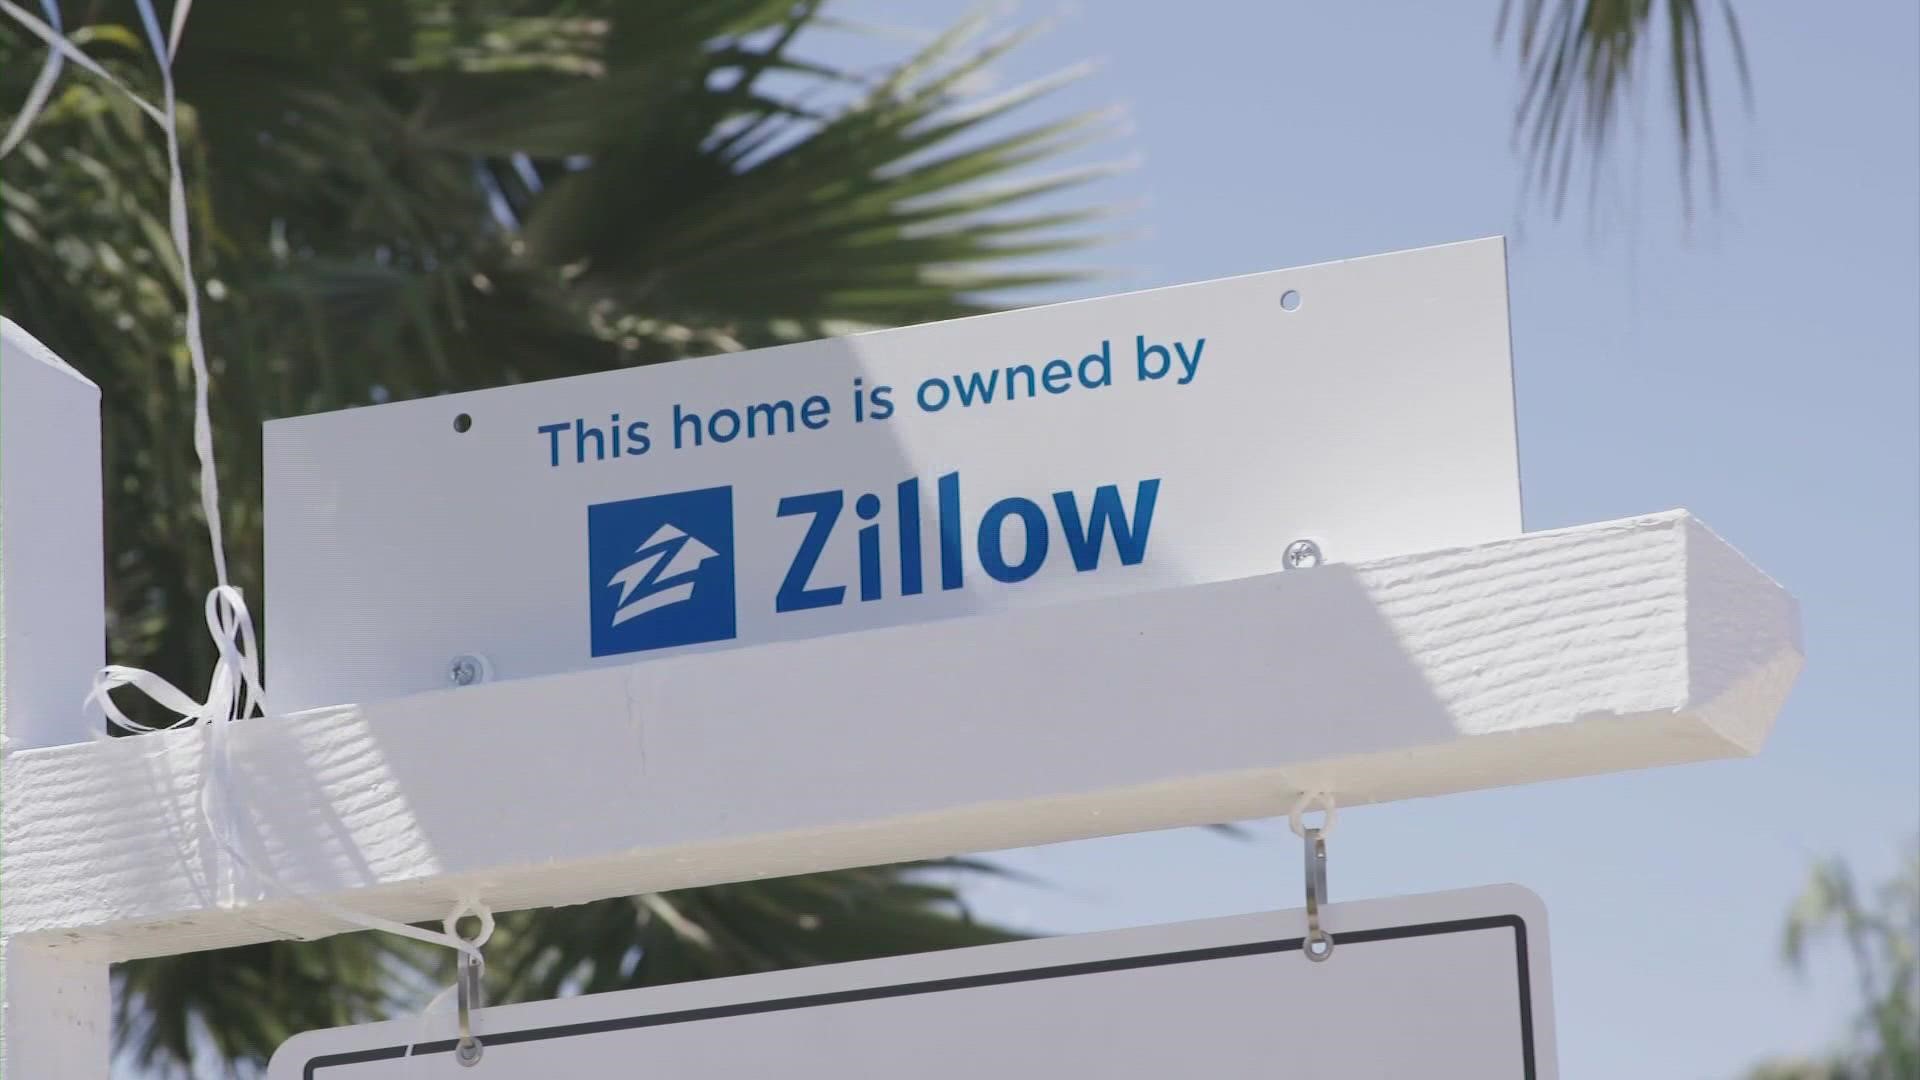 Zillow will shutter its home buying business and lay off 25% of its workforce over the next few quarters, the company announced Nov. 2.